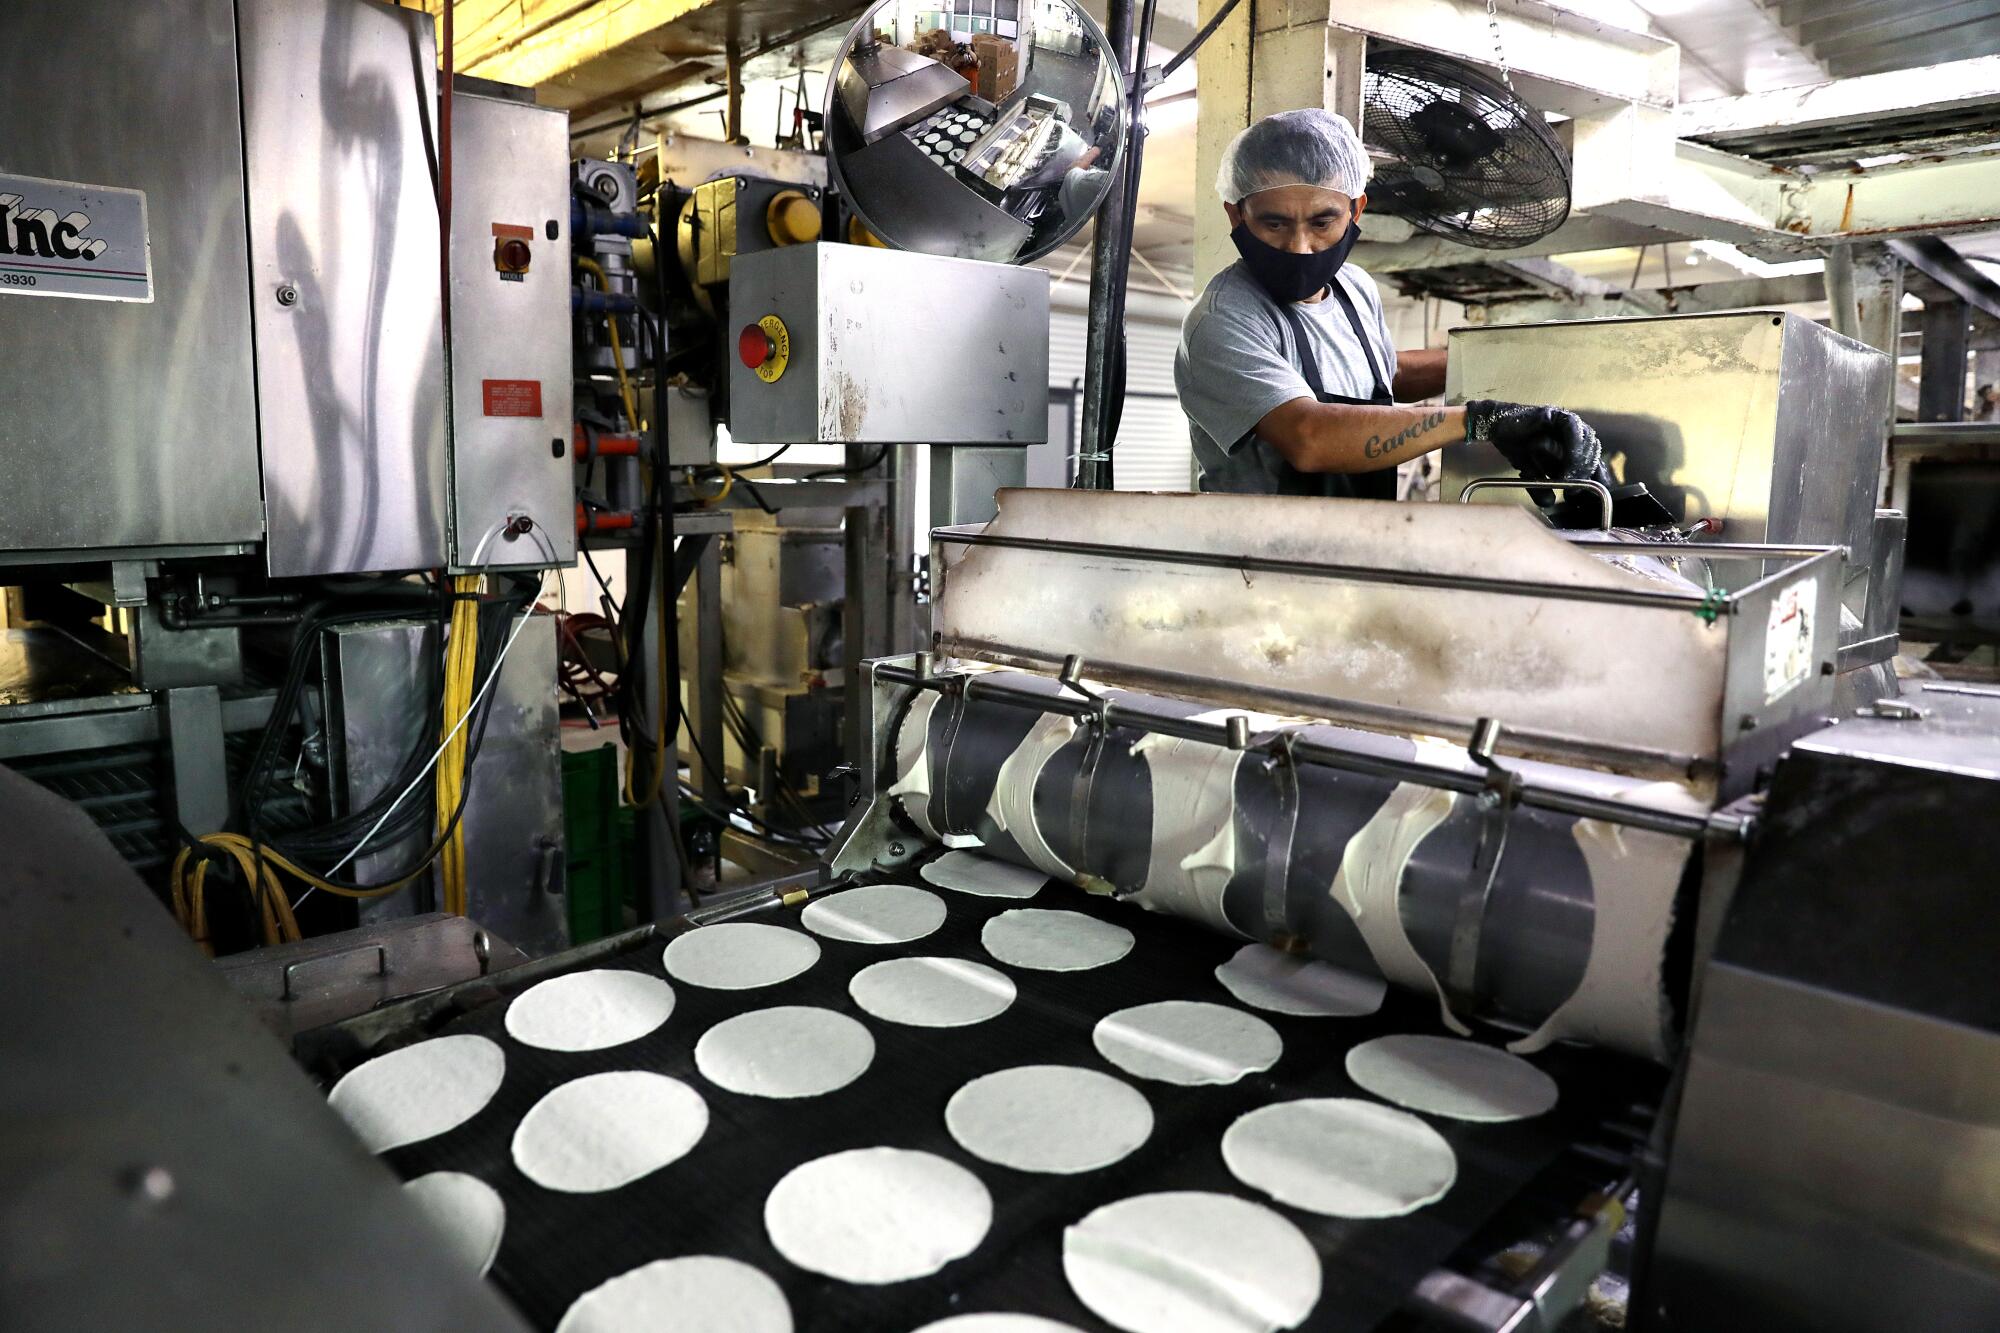 A man operates a machine that produces tortillas in a factory